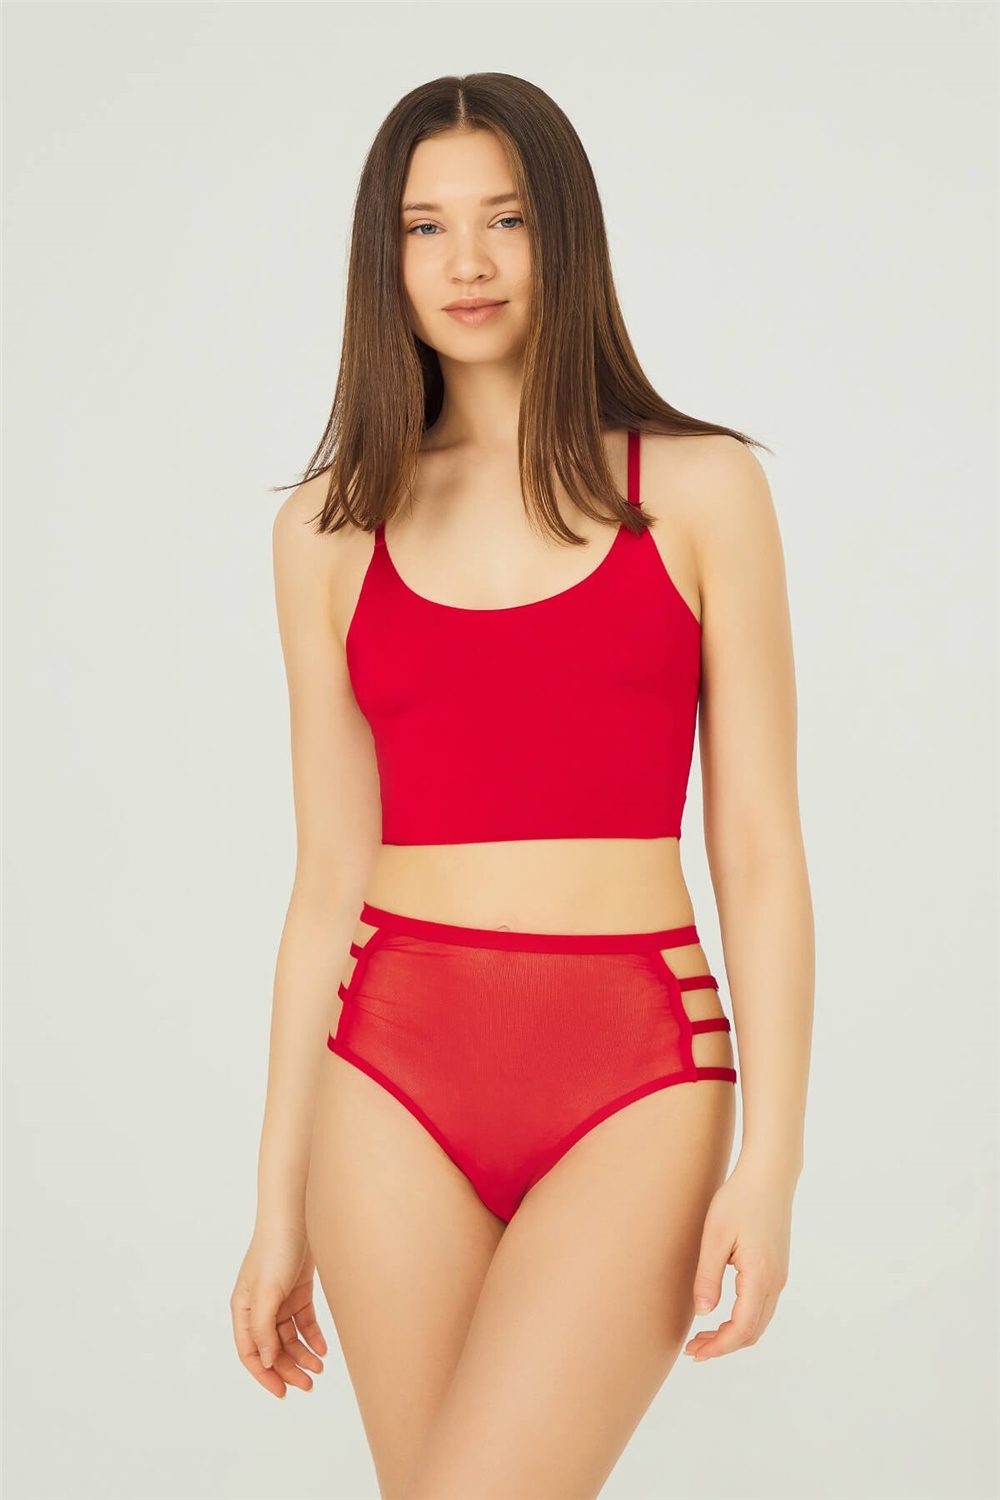 high-waisted-transparent-bikini-women-panty-with-4-stripes-ch6021-red-1-2